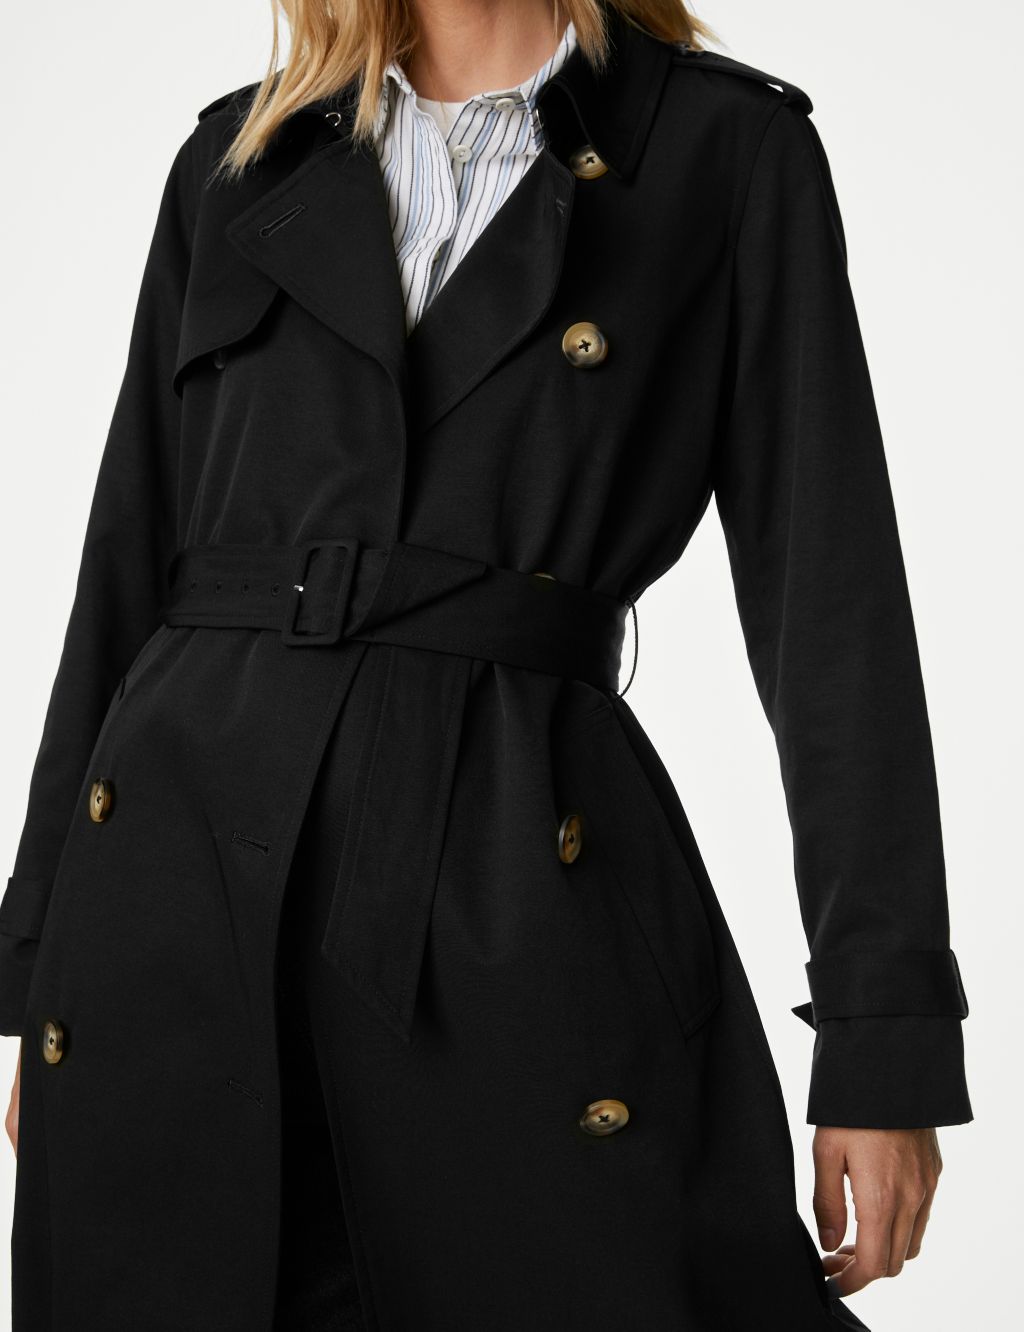 Stormwear™ Double Breasted Trench Coat image 4